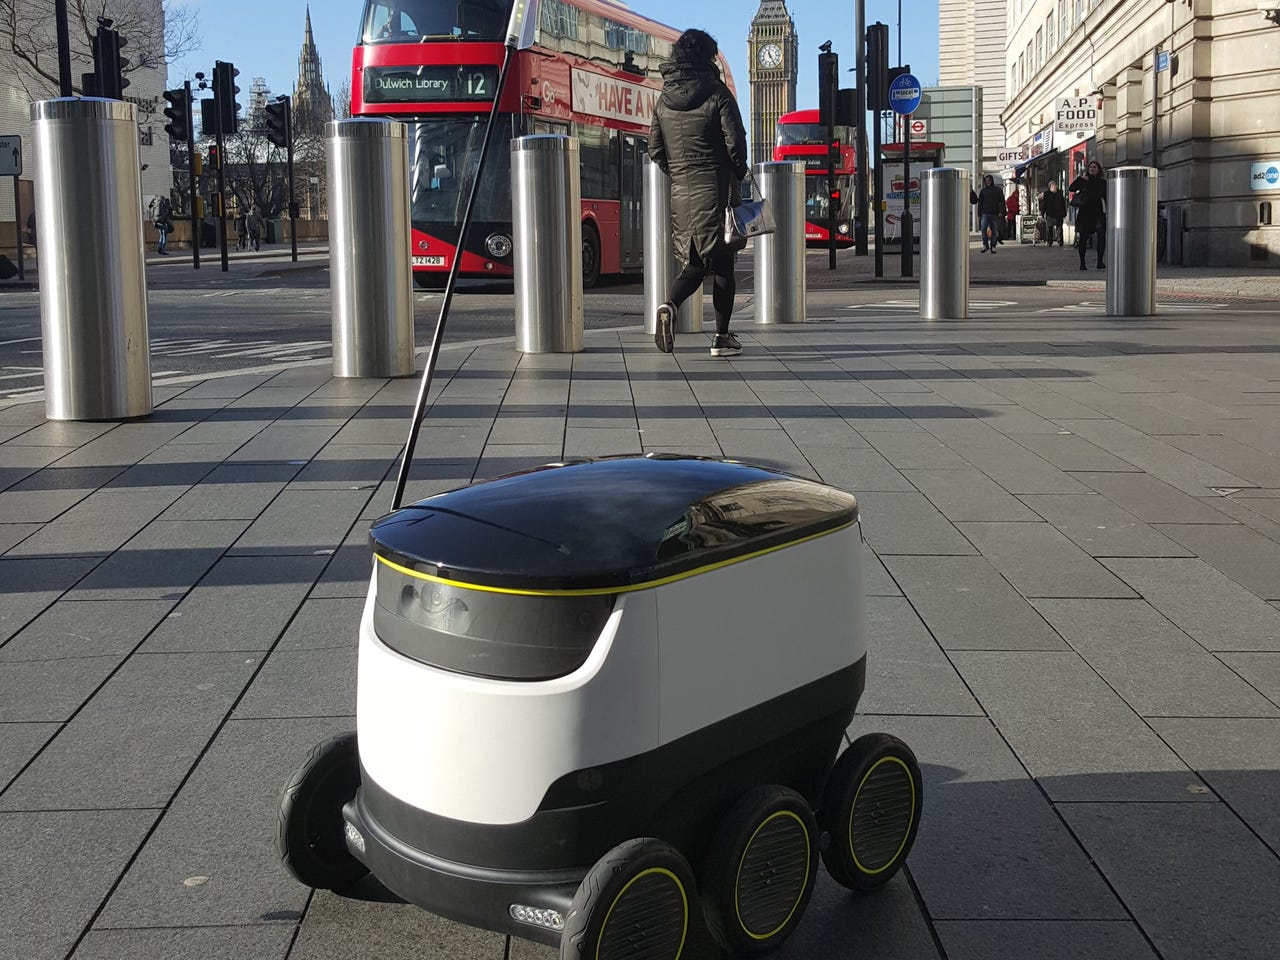 starship-is-trialling-the-delivery-robots-in-london.jpg